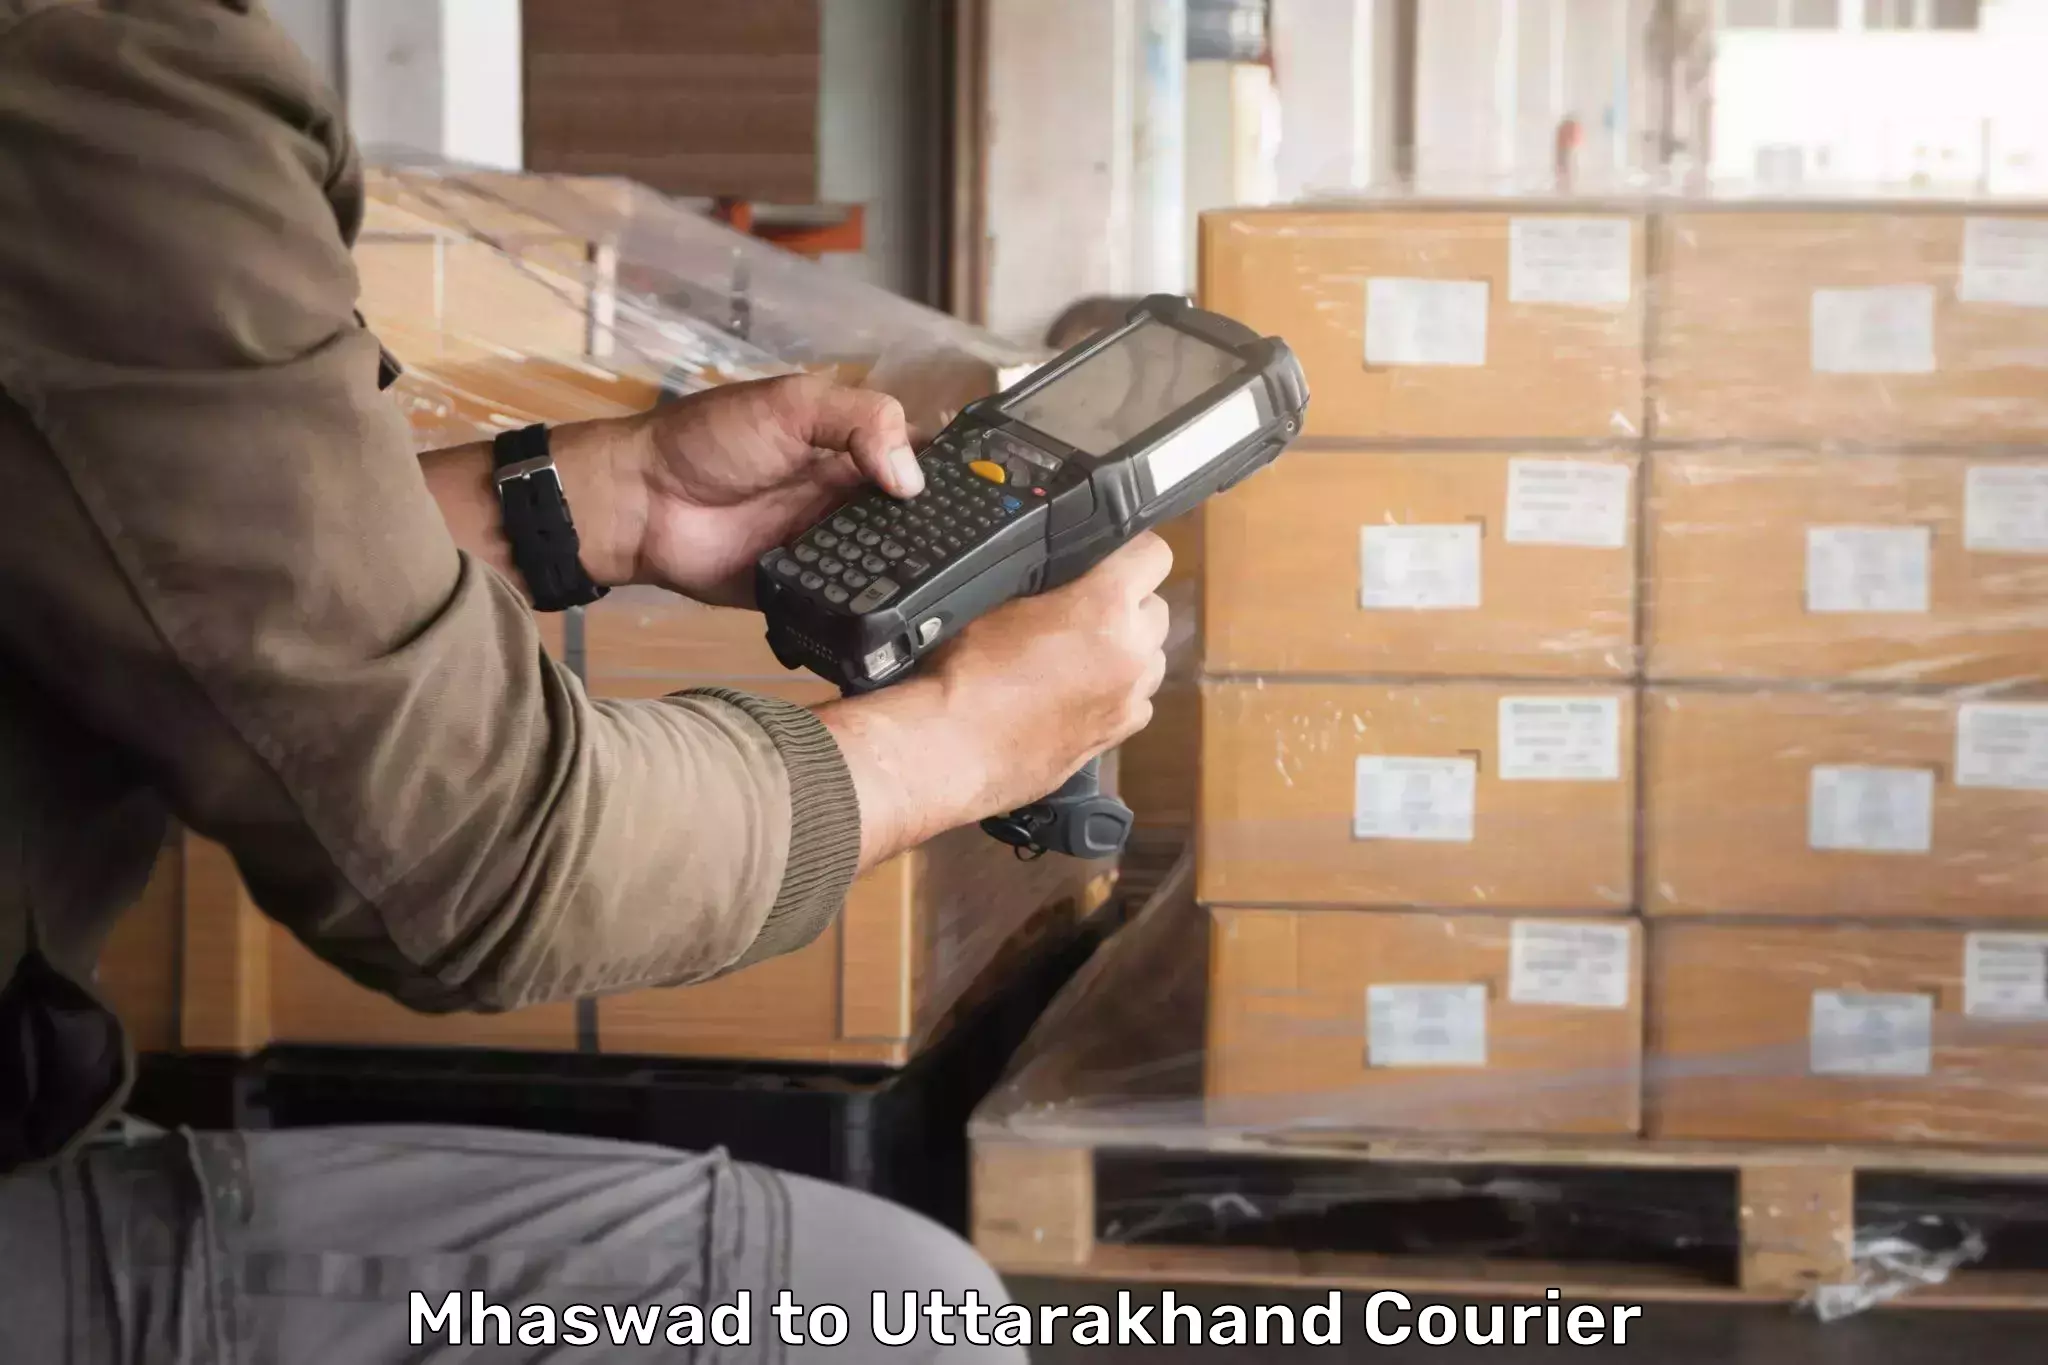 Parcel handling and care Mhaswad to IIT Roorkee